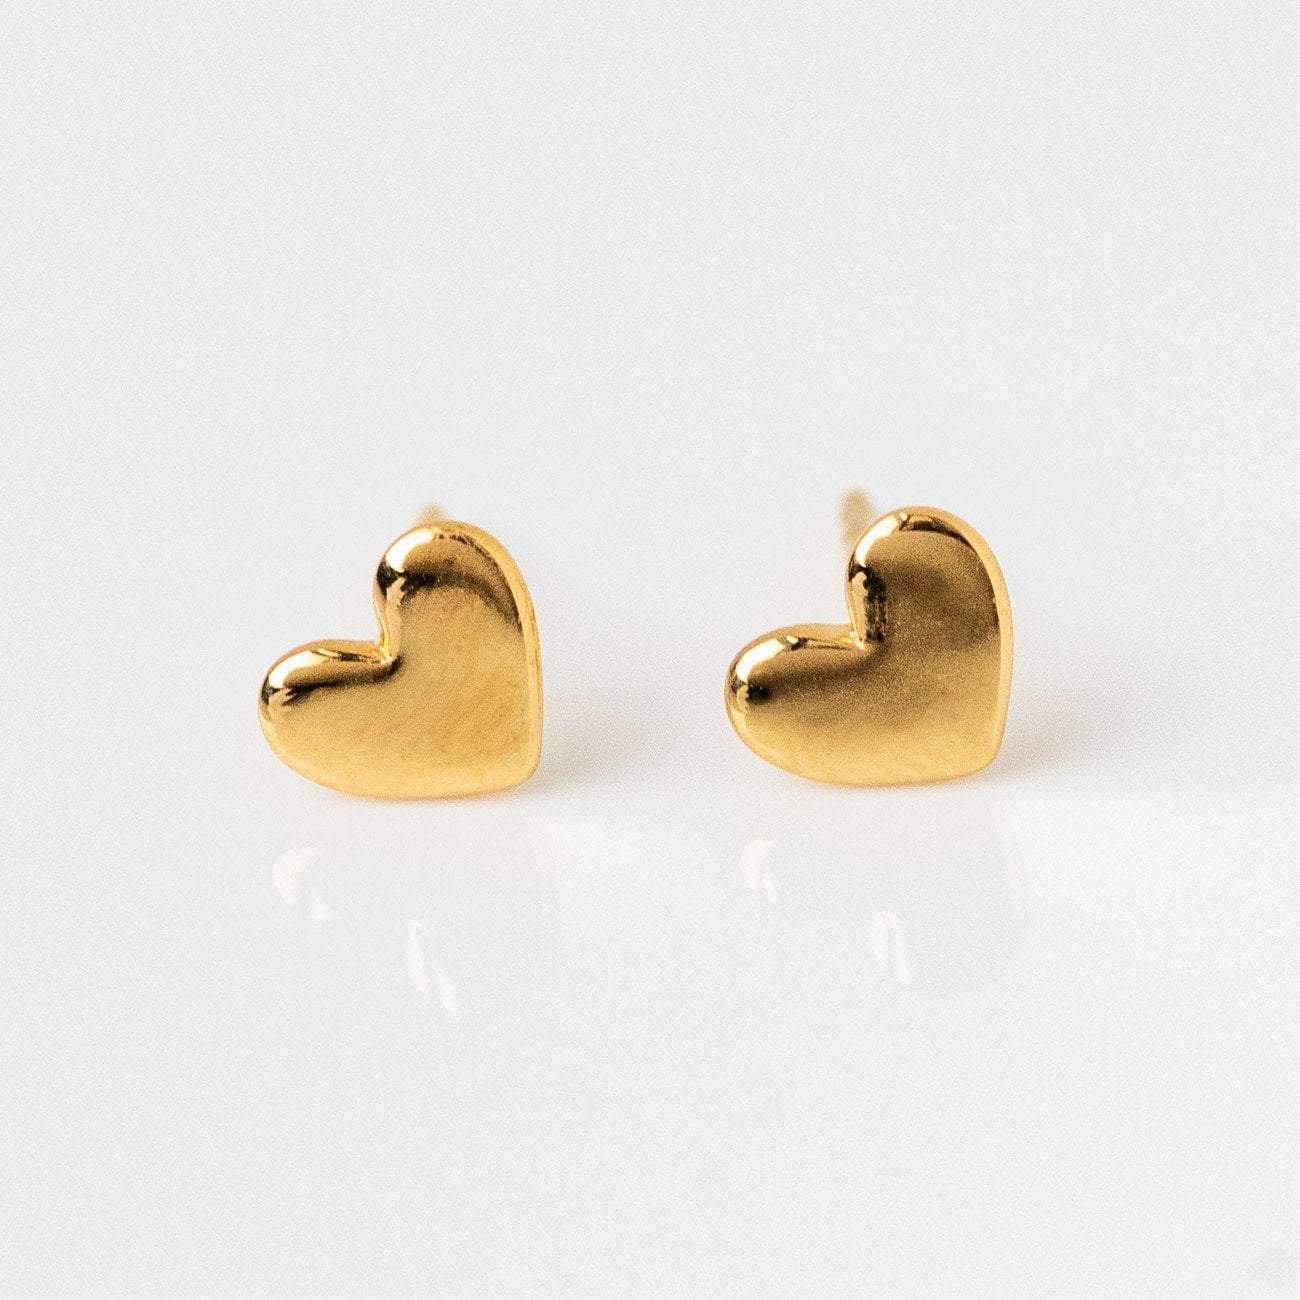 Solid Gold Heart Earrings - Local Eclectic